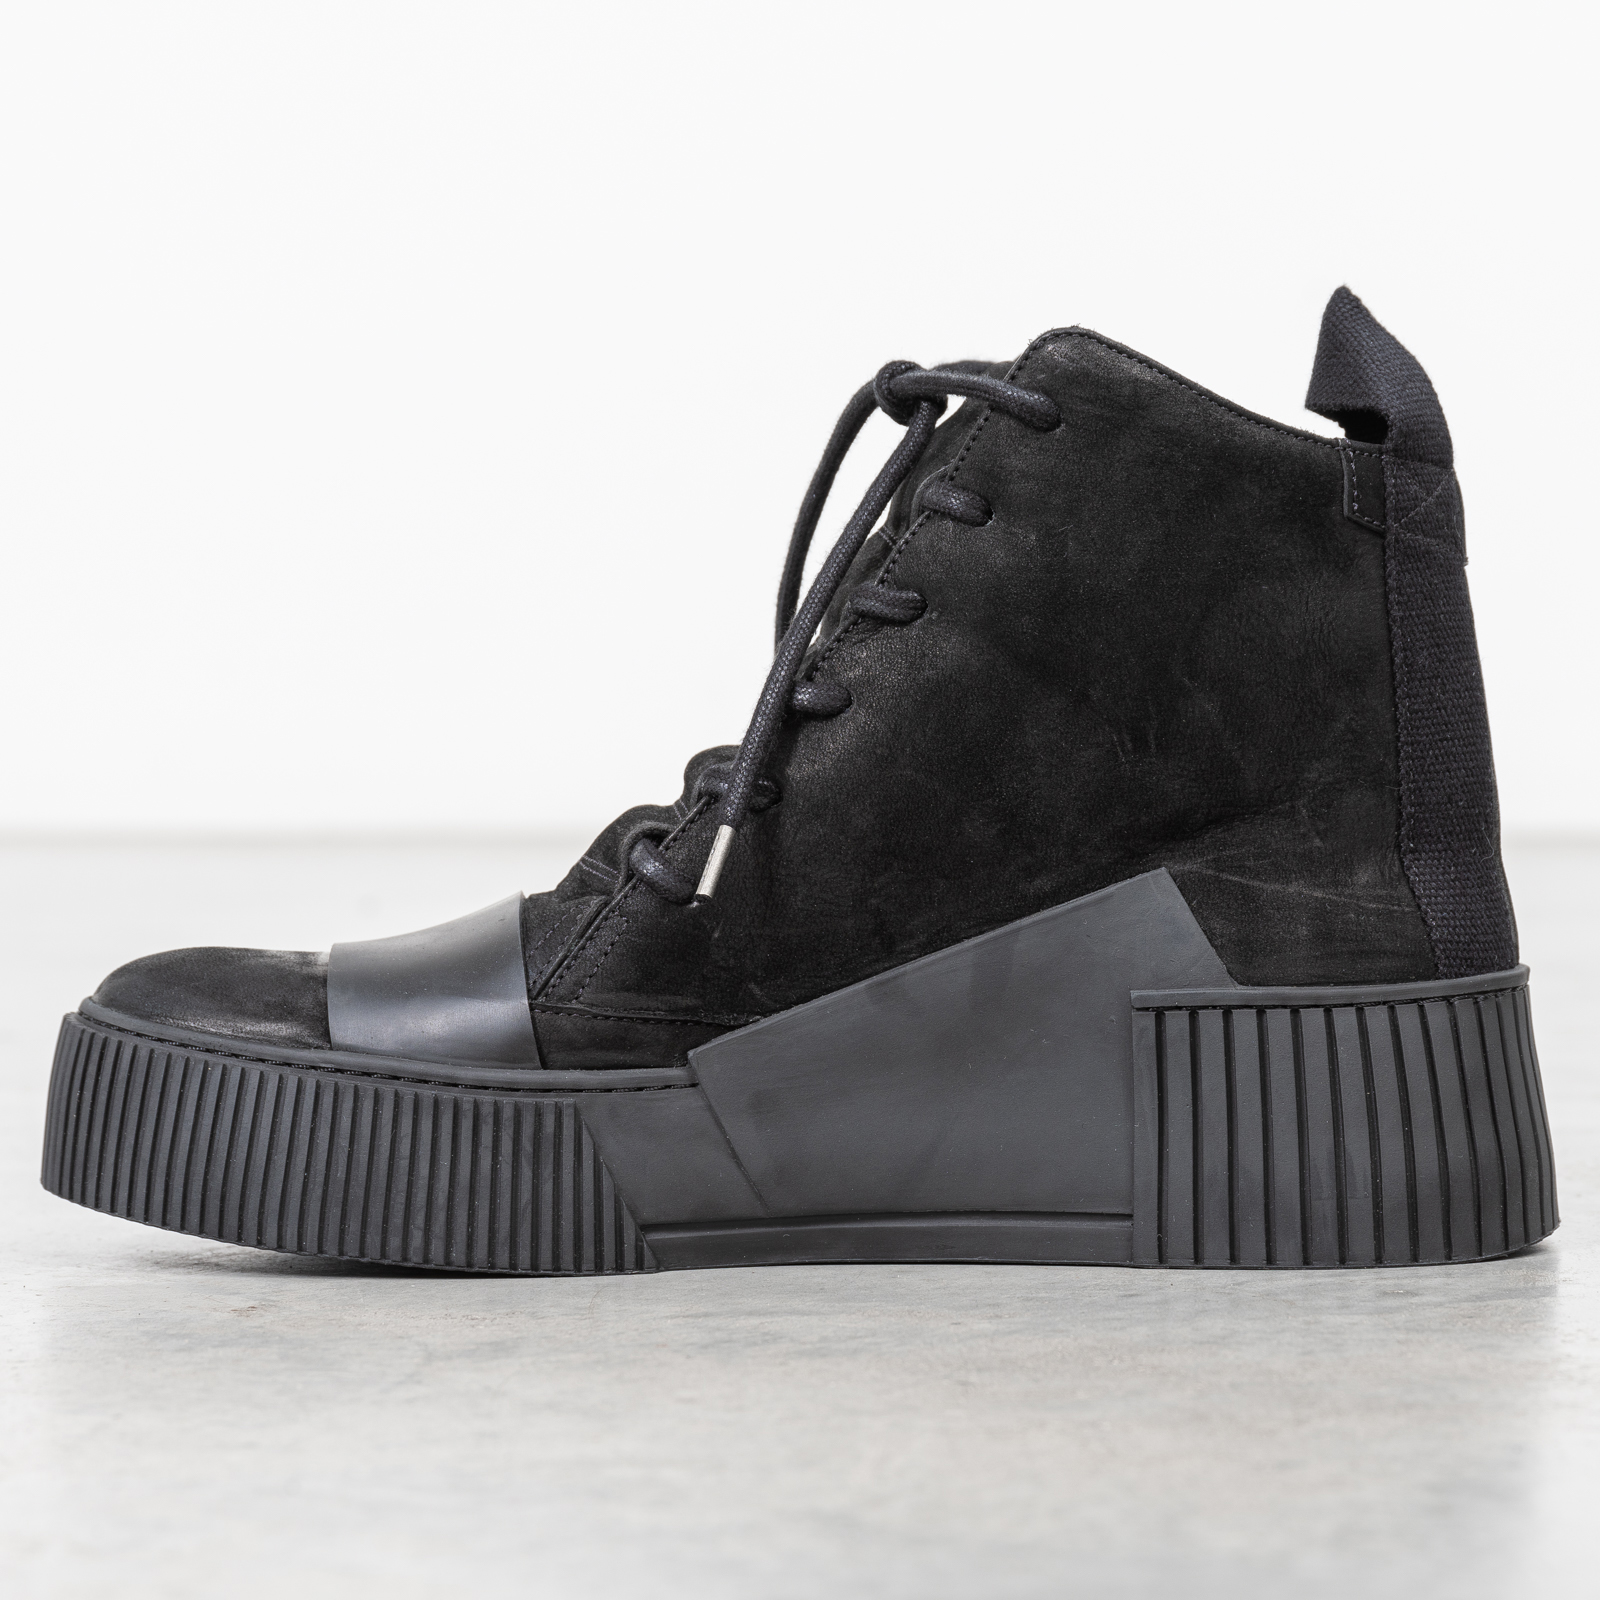 WASHED BLACK BAMBA 1 SNEAKERS|wolfensson